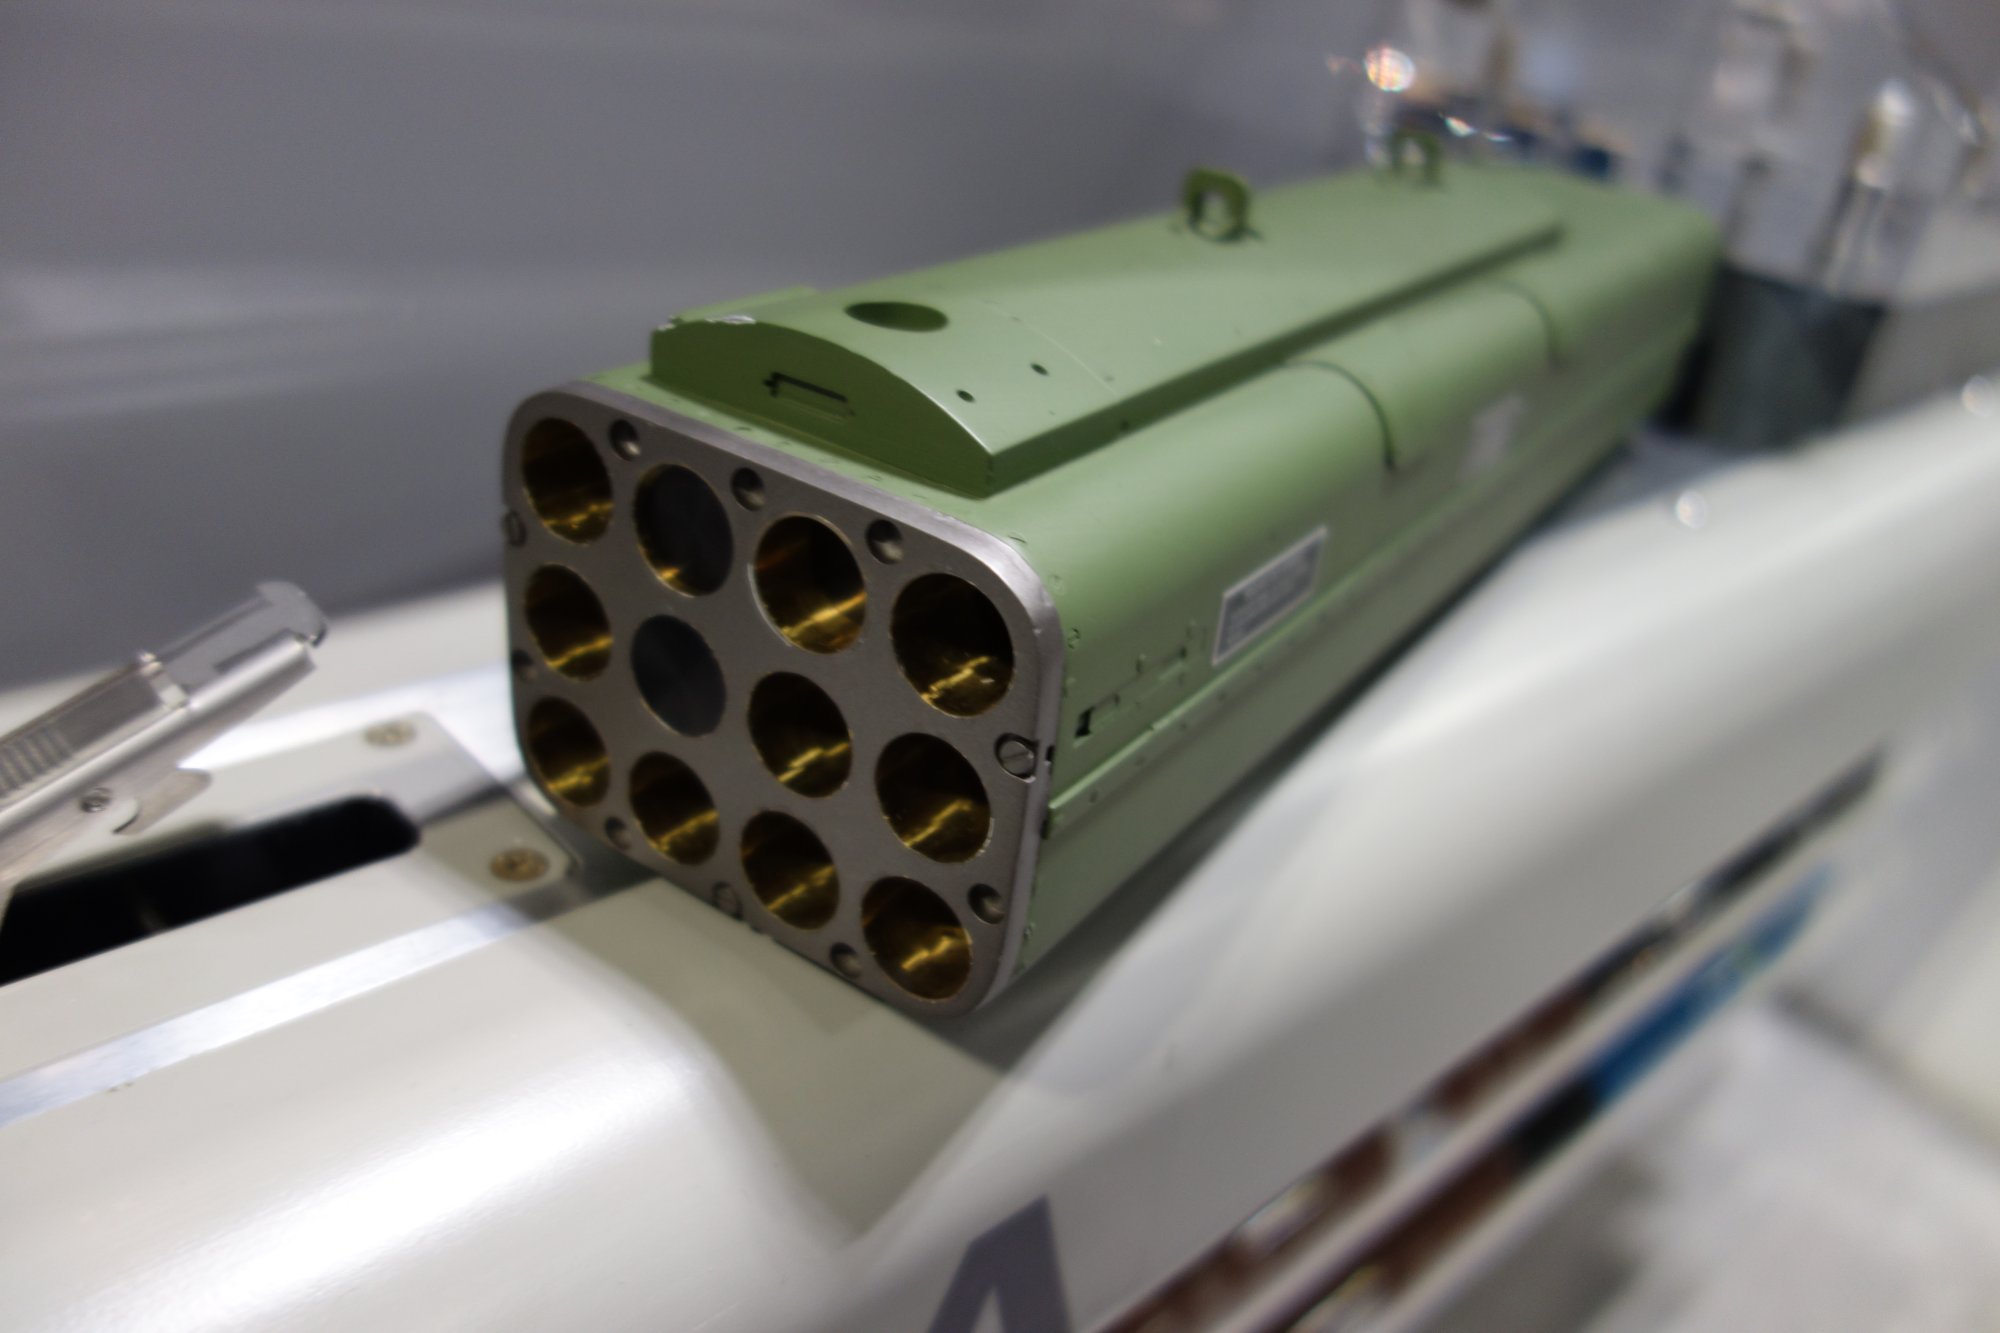 Thales_Defense_TDA_Armaments_Induction_Laser_Guided_Rocket_ILGR_RPM_Wireless_2.75-inch_70mm_Precision-Guided_Rocket_with_ACULEUS_LG_Warhead_SOFIC_2015_David_Crane_DefenseReview.com_DR_1.jpg